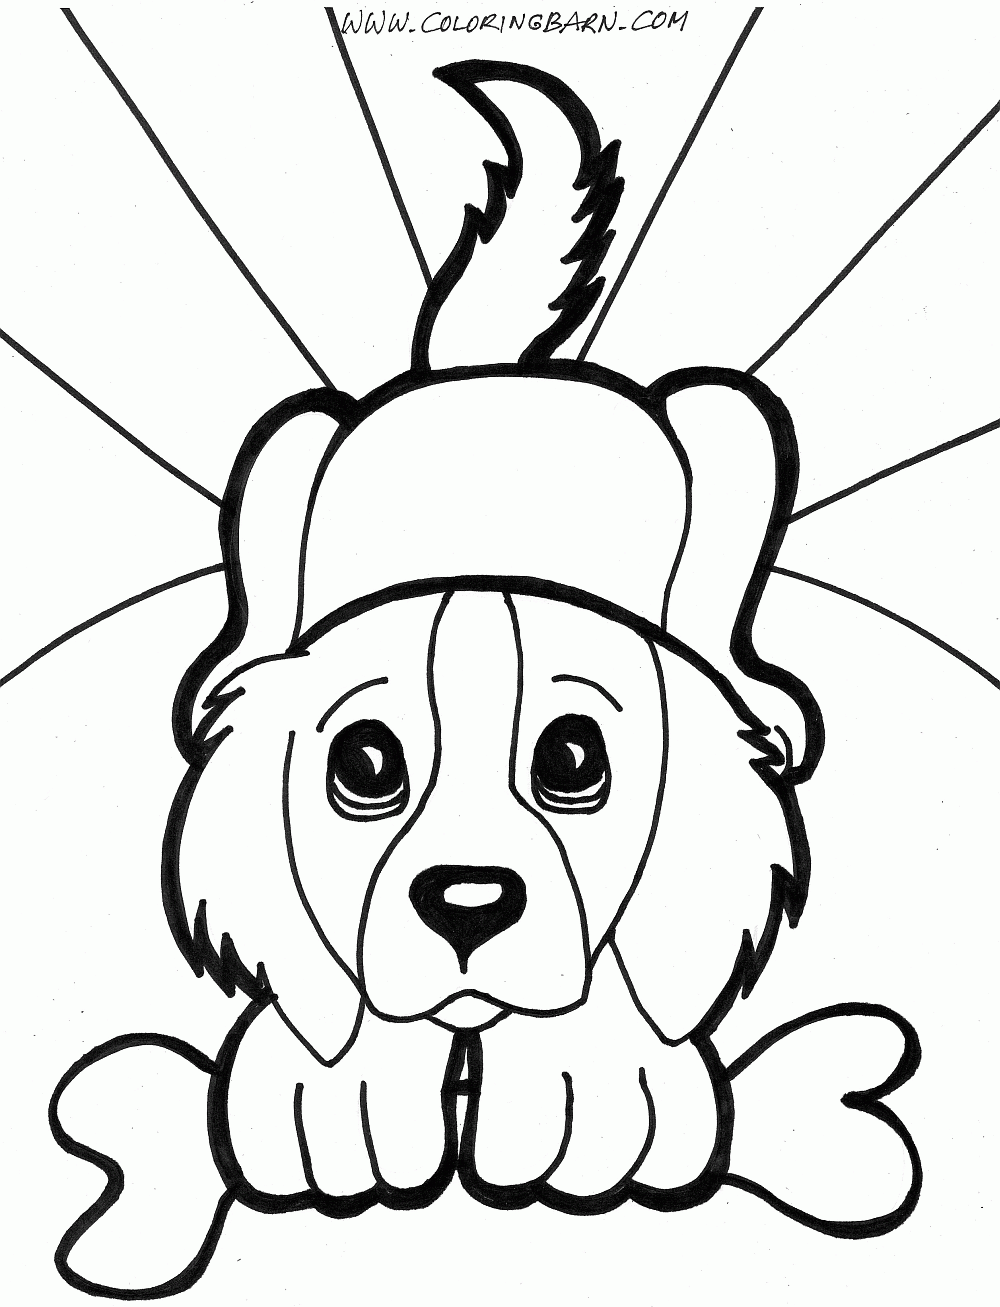 Cartoon Puppy Dog Coloring Page - Coloring Pages For All Ages